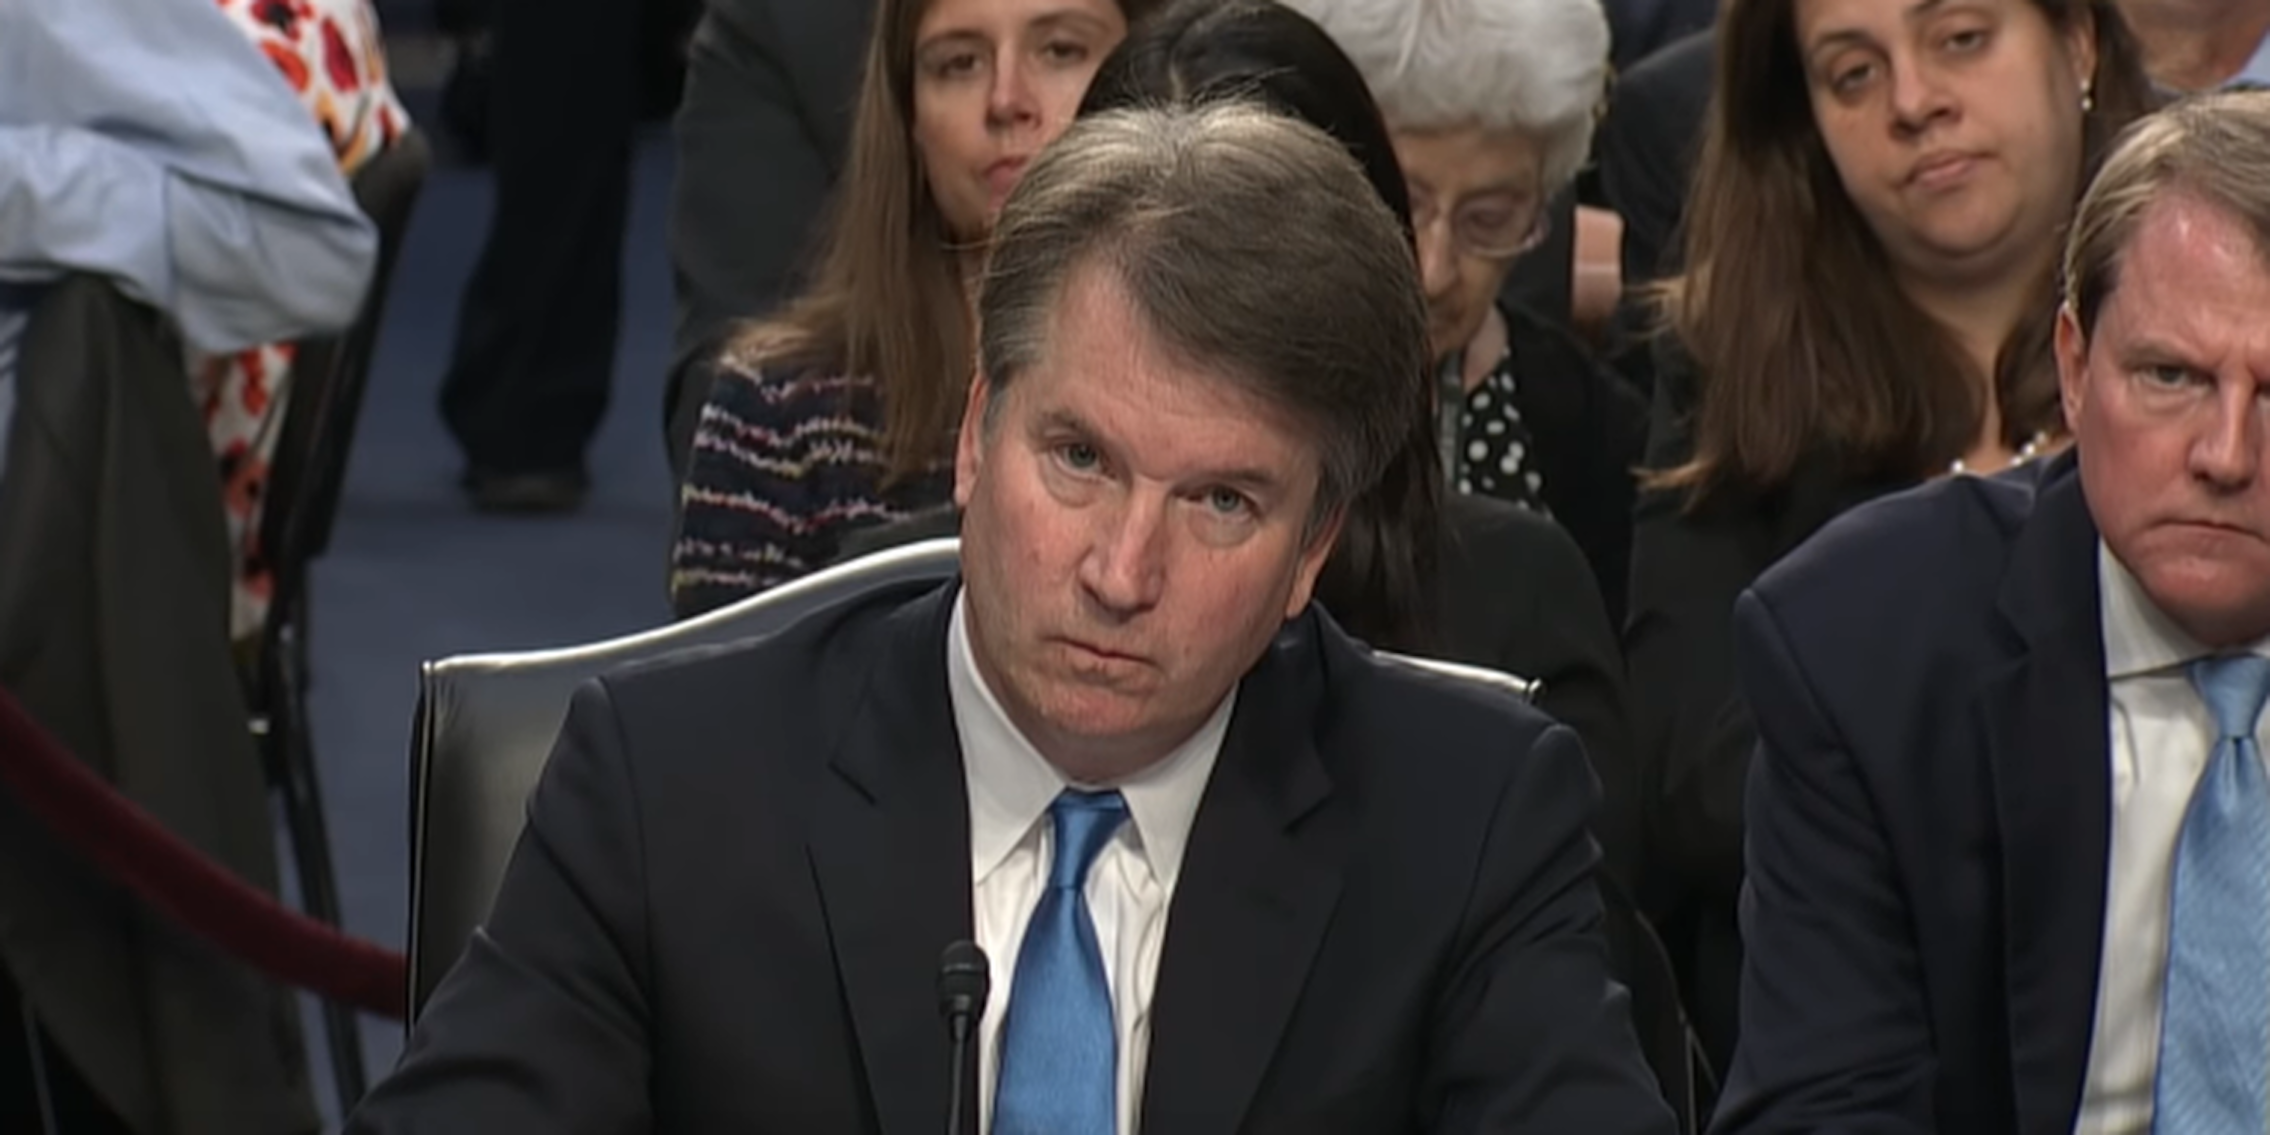 Kavanaugh-Ford live stream: How to watch the Kavanaugh-Ford hearing online